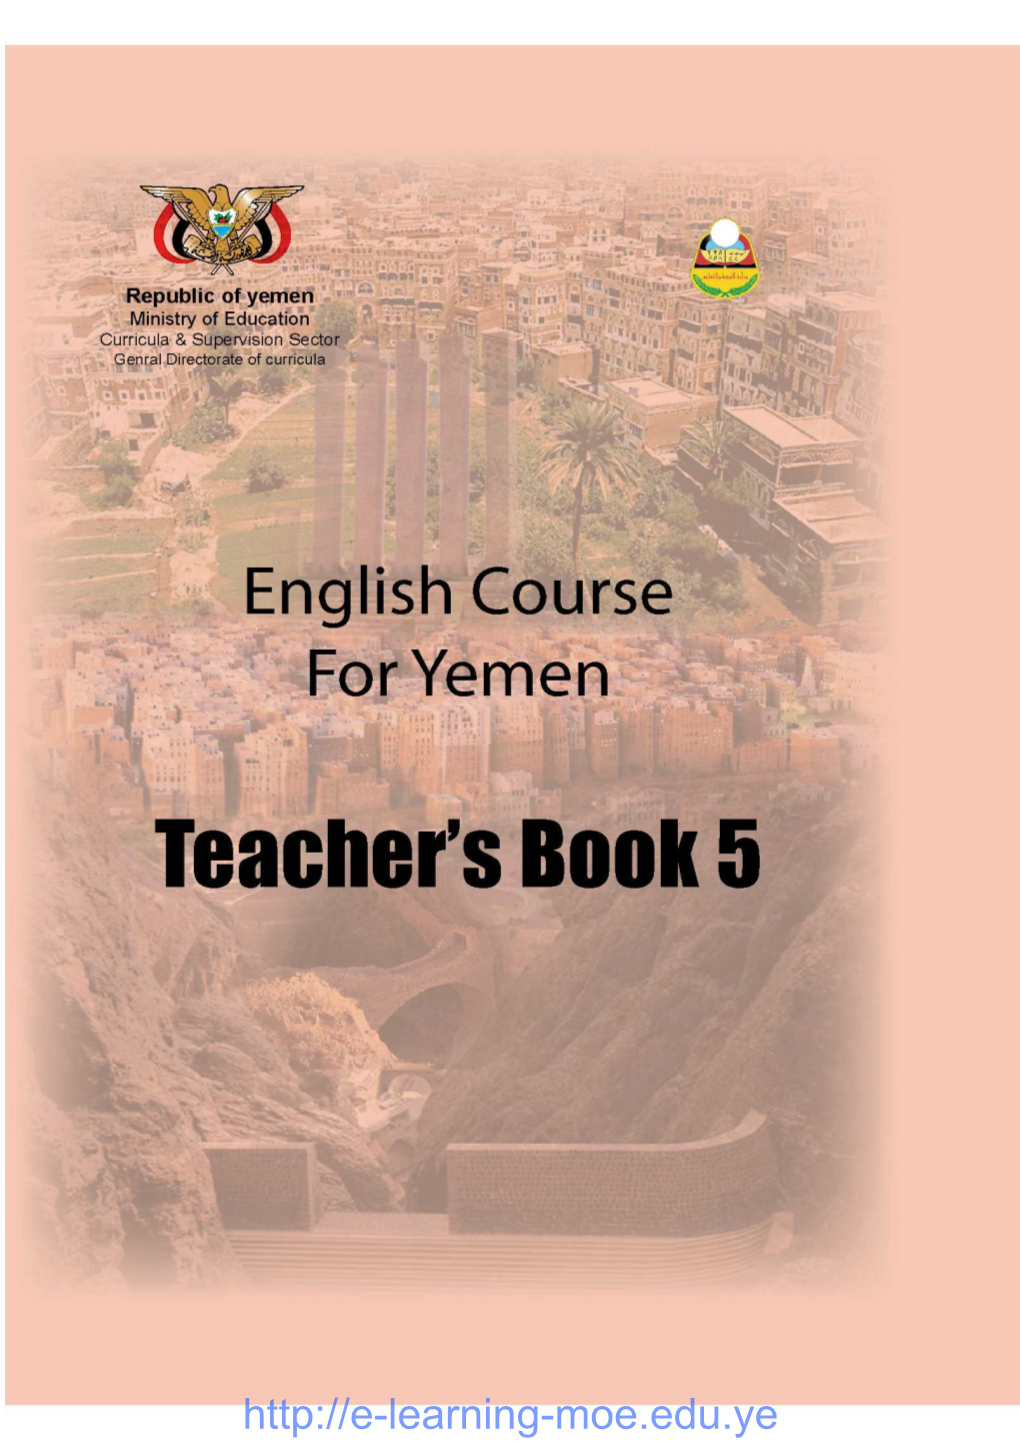 Crescent Teacher's Book 5 Introduction Page Crescent English Course - the Background